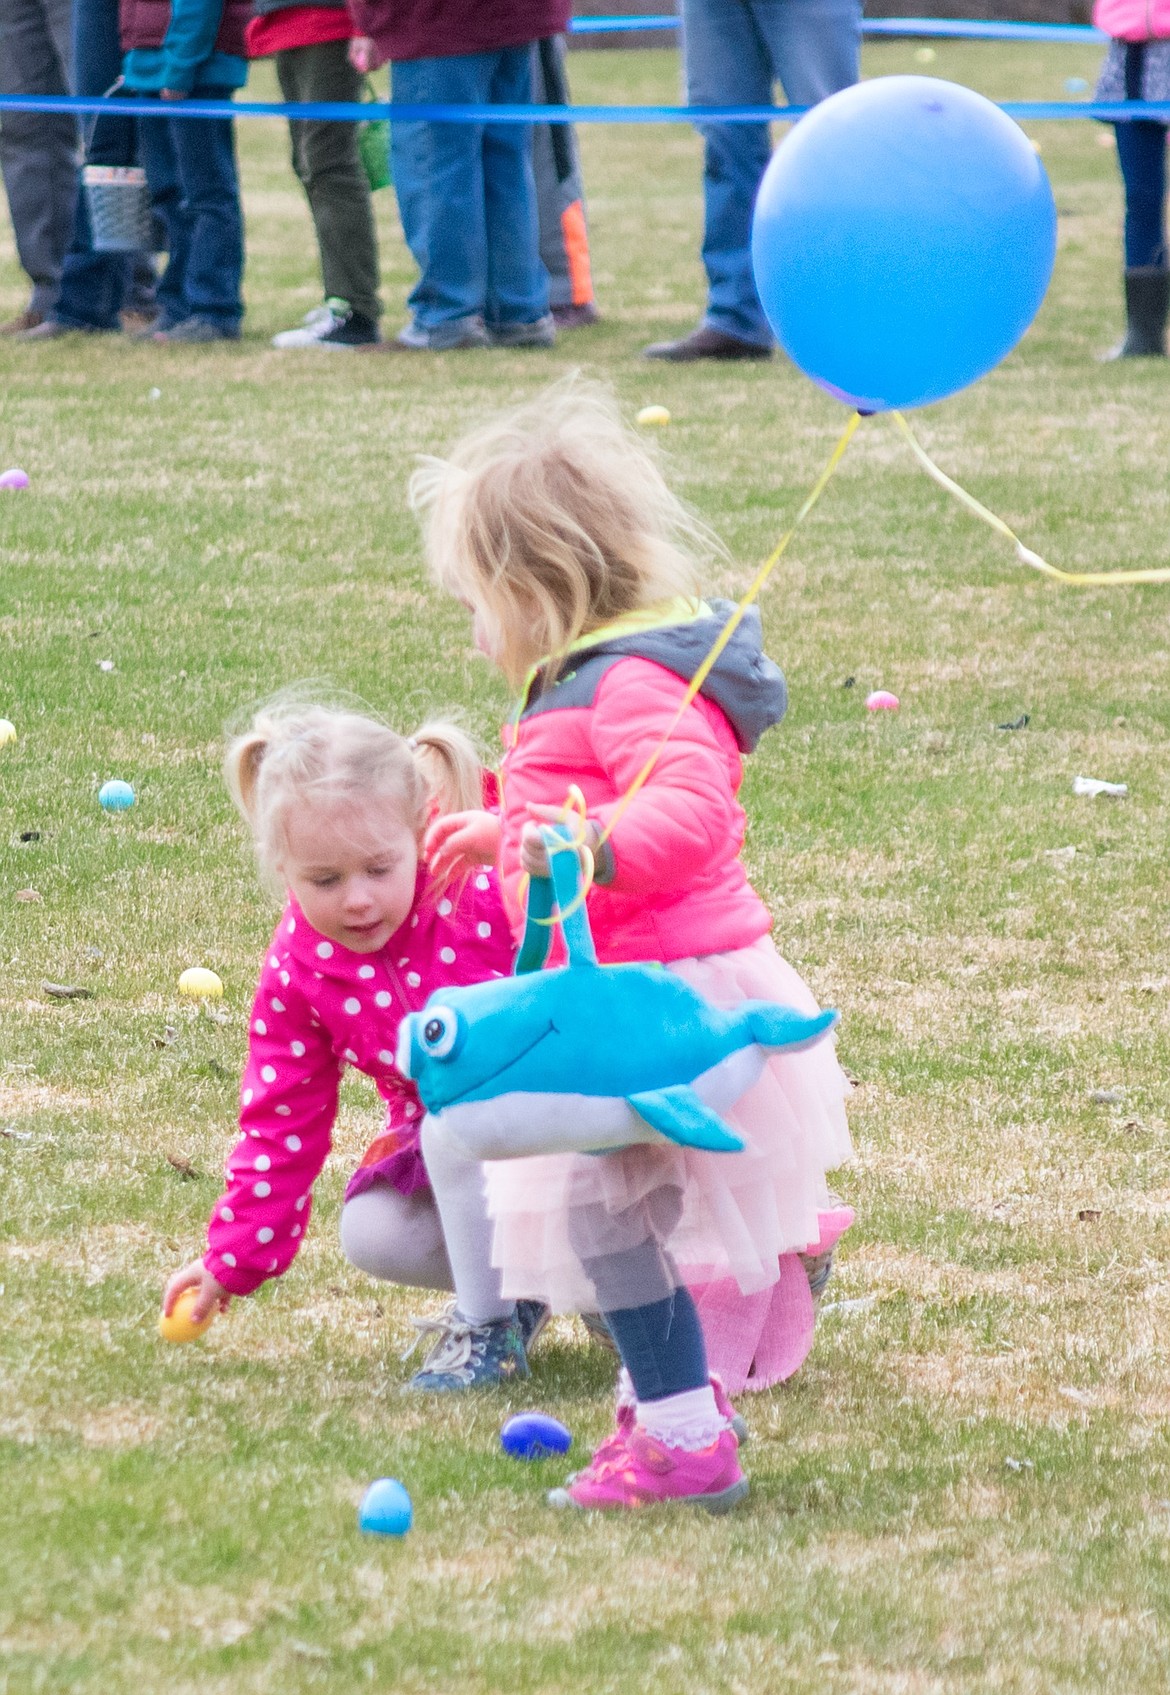 Though Ava Tallmadge and Eva Holzer had never met before, the pair spent the entire Easter egg hunt in the 1-2 year old section adding eggs to each other&#146;s baskets at the Roosevelt Park in Troy. (Ben Kibbey/The Western News)